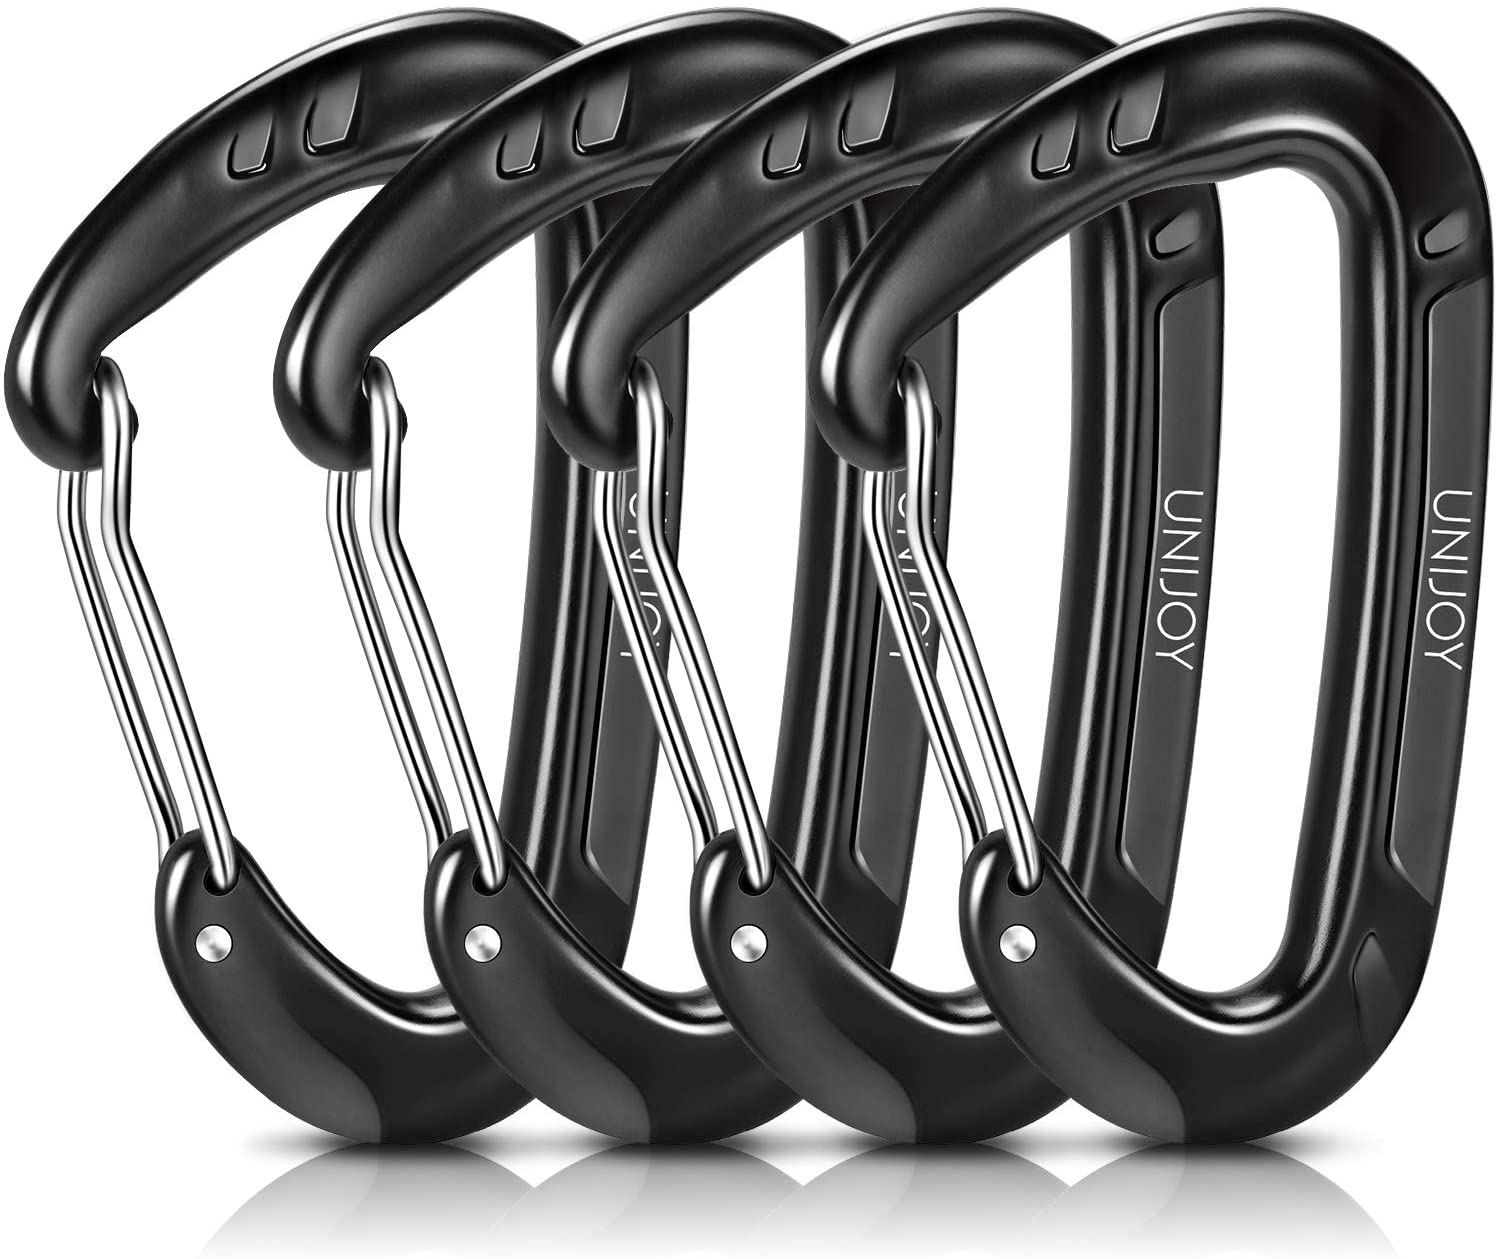 Unijoy Wiregate 2697-Pound Carrying Capacity Aluminum Carabiners, 4-Piece